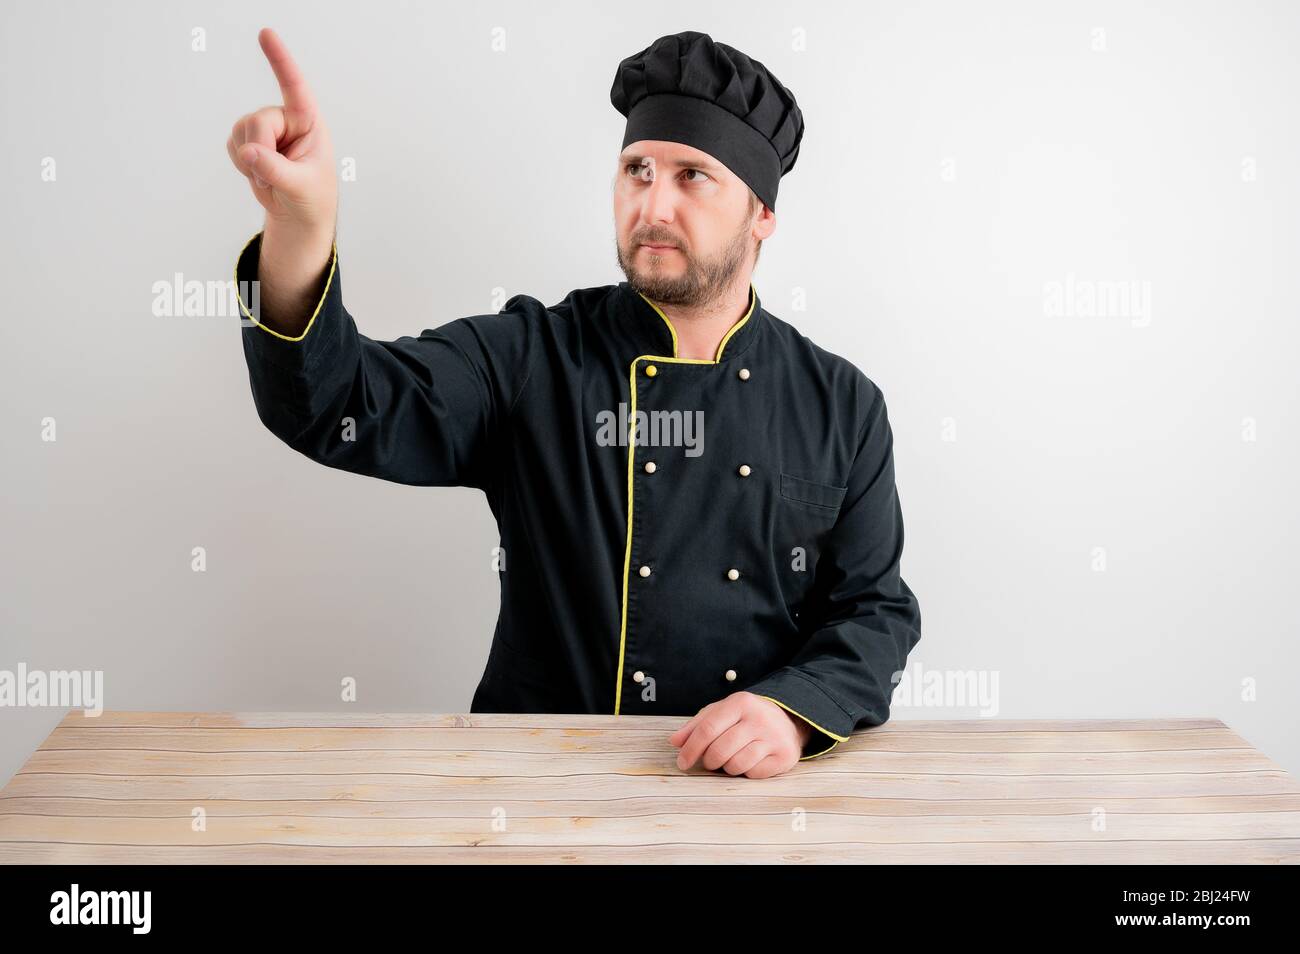 Young male chef in black uniform presses a virtual button posing on a white isolated background Stock Photo